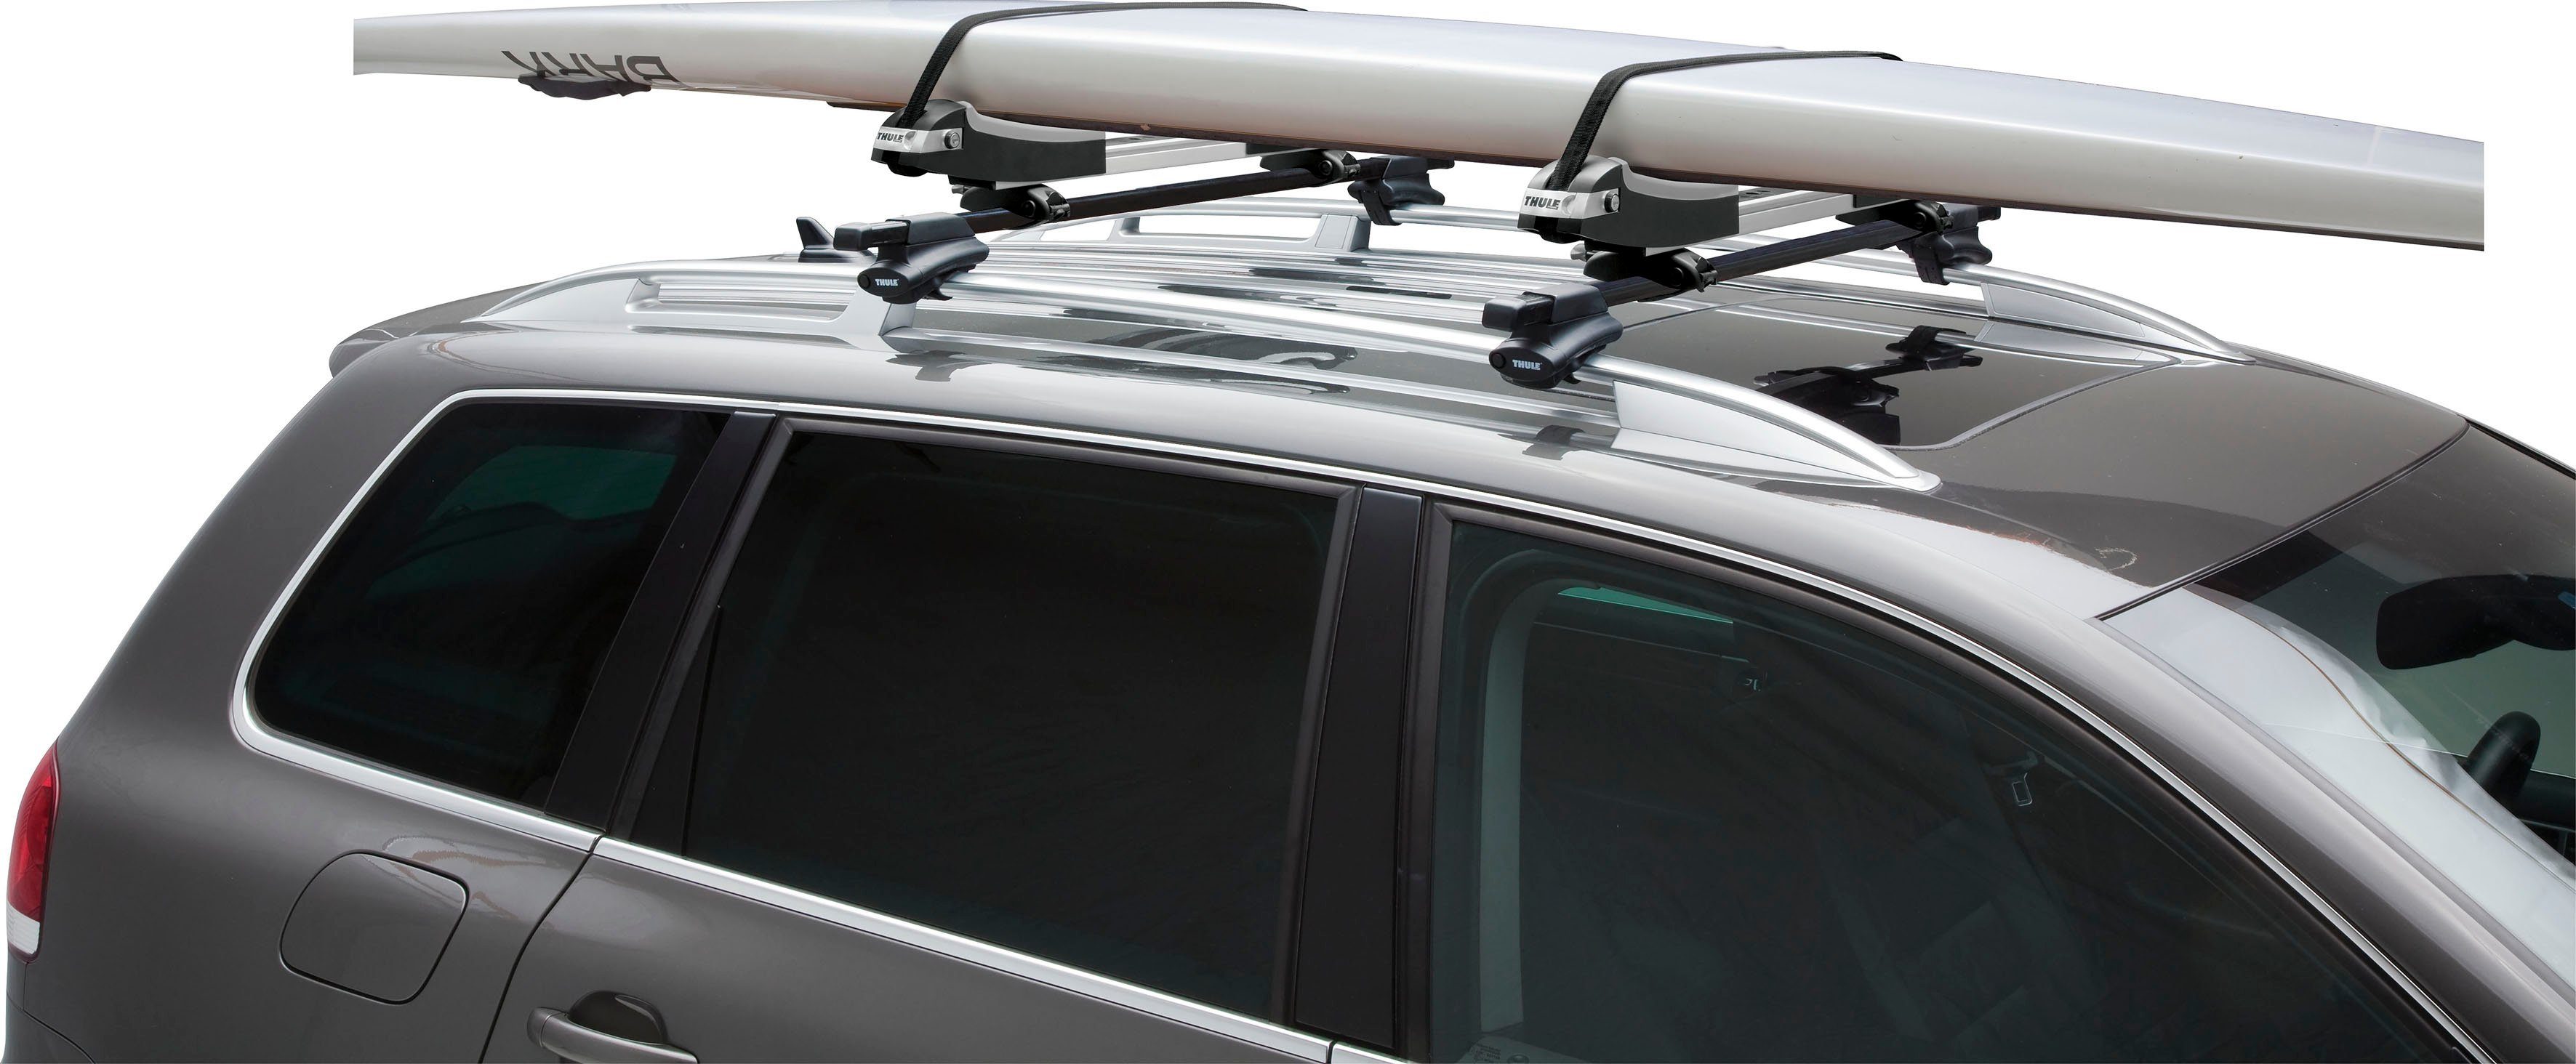 Thule Dachträger SUP SUP-Boards für XT, Taxi